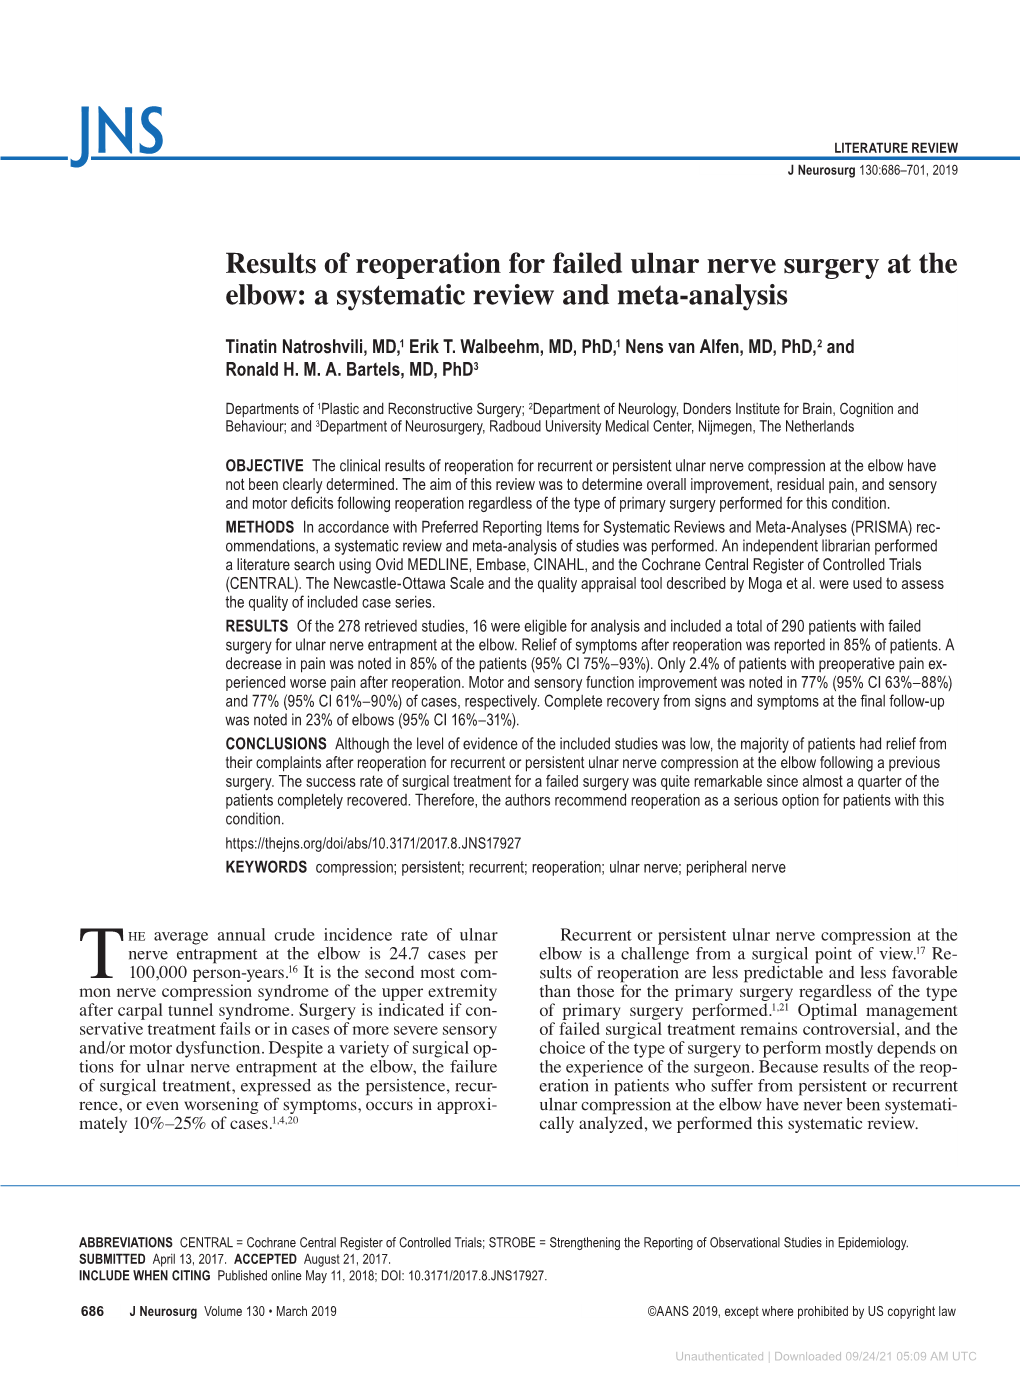 Results of Reoperation for Failed Ulnar Nerve Surgery at the Elbow: a Systematic Review and Meta-Analysis